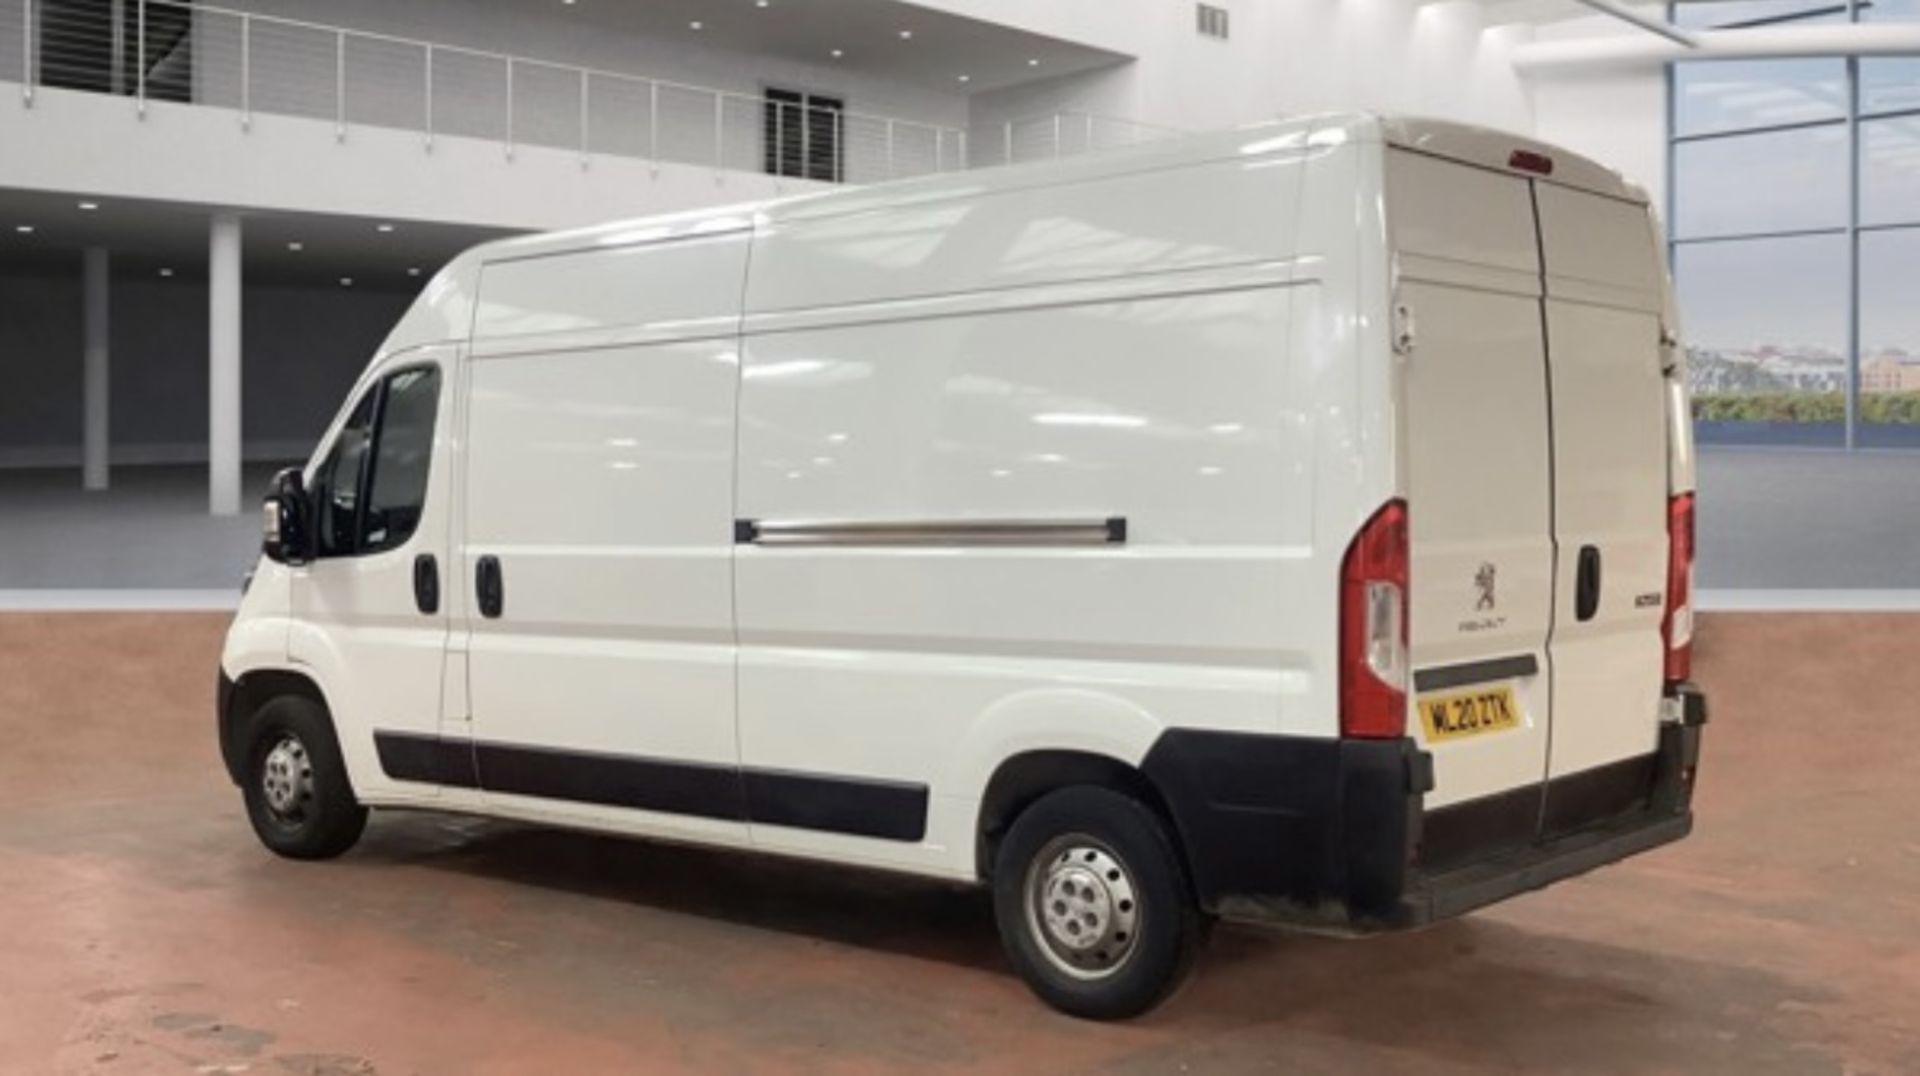 (ON SALE) PEUGEOT BOXER 2.2 "BLUE-HDI PROFESSIONAL "LONG WHEEL BASE" 20 REG - FSH- AIR CON - Image 4 of 12